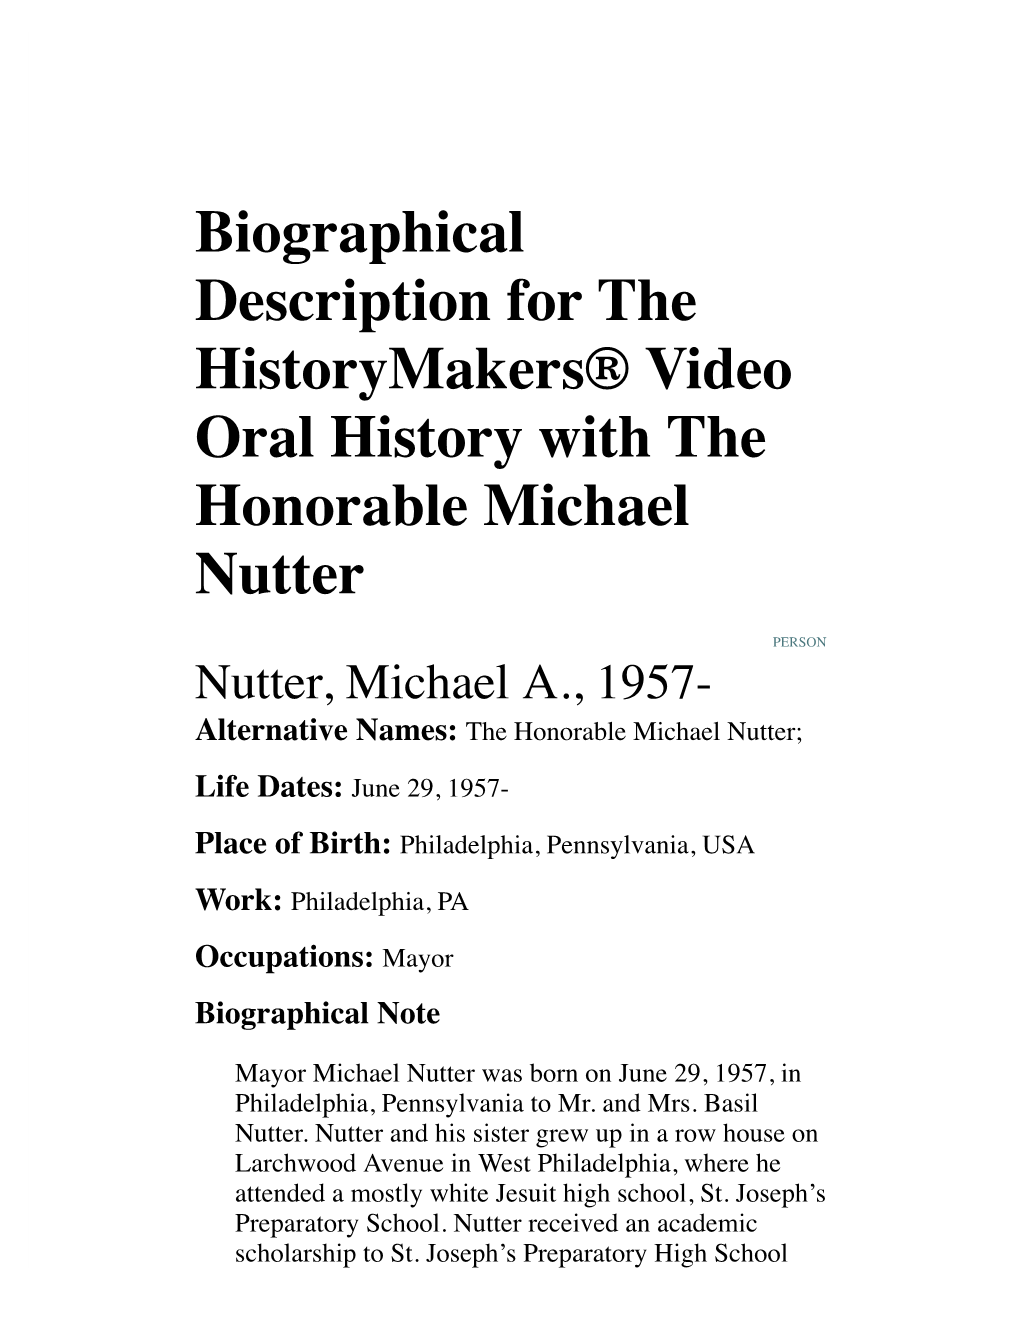 Biographical Description for the Historymakers® Video Oral History with the Honorable Michael Nutter